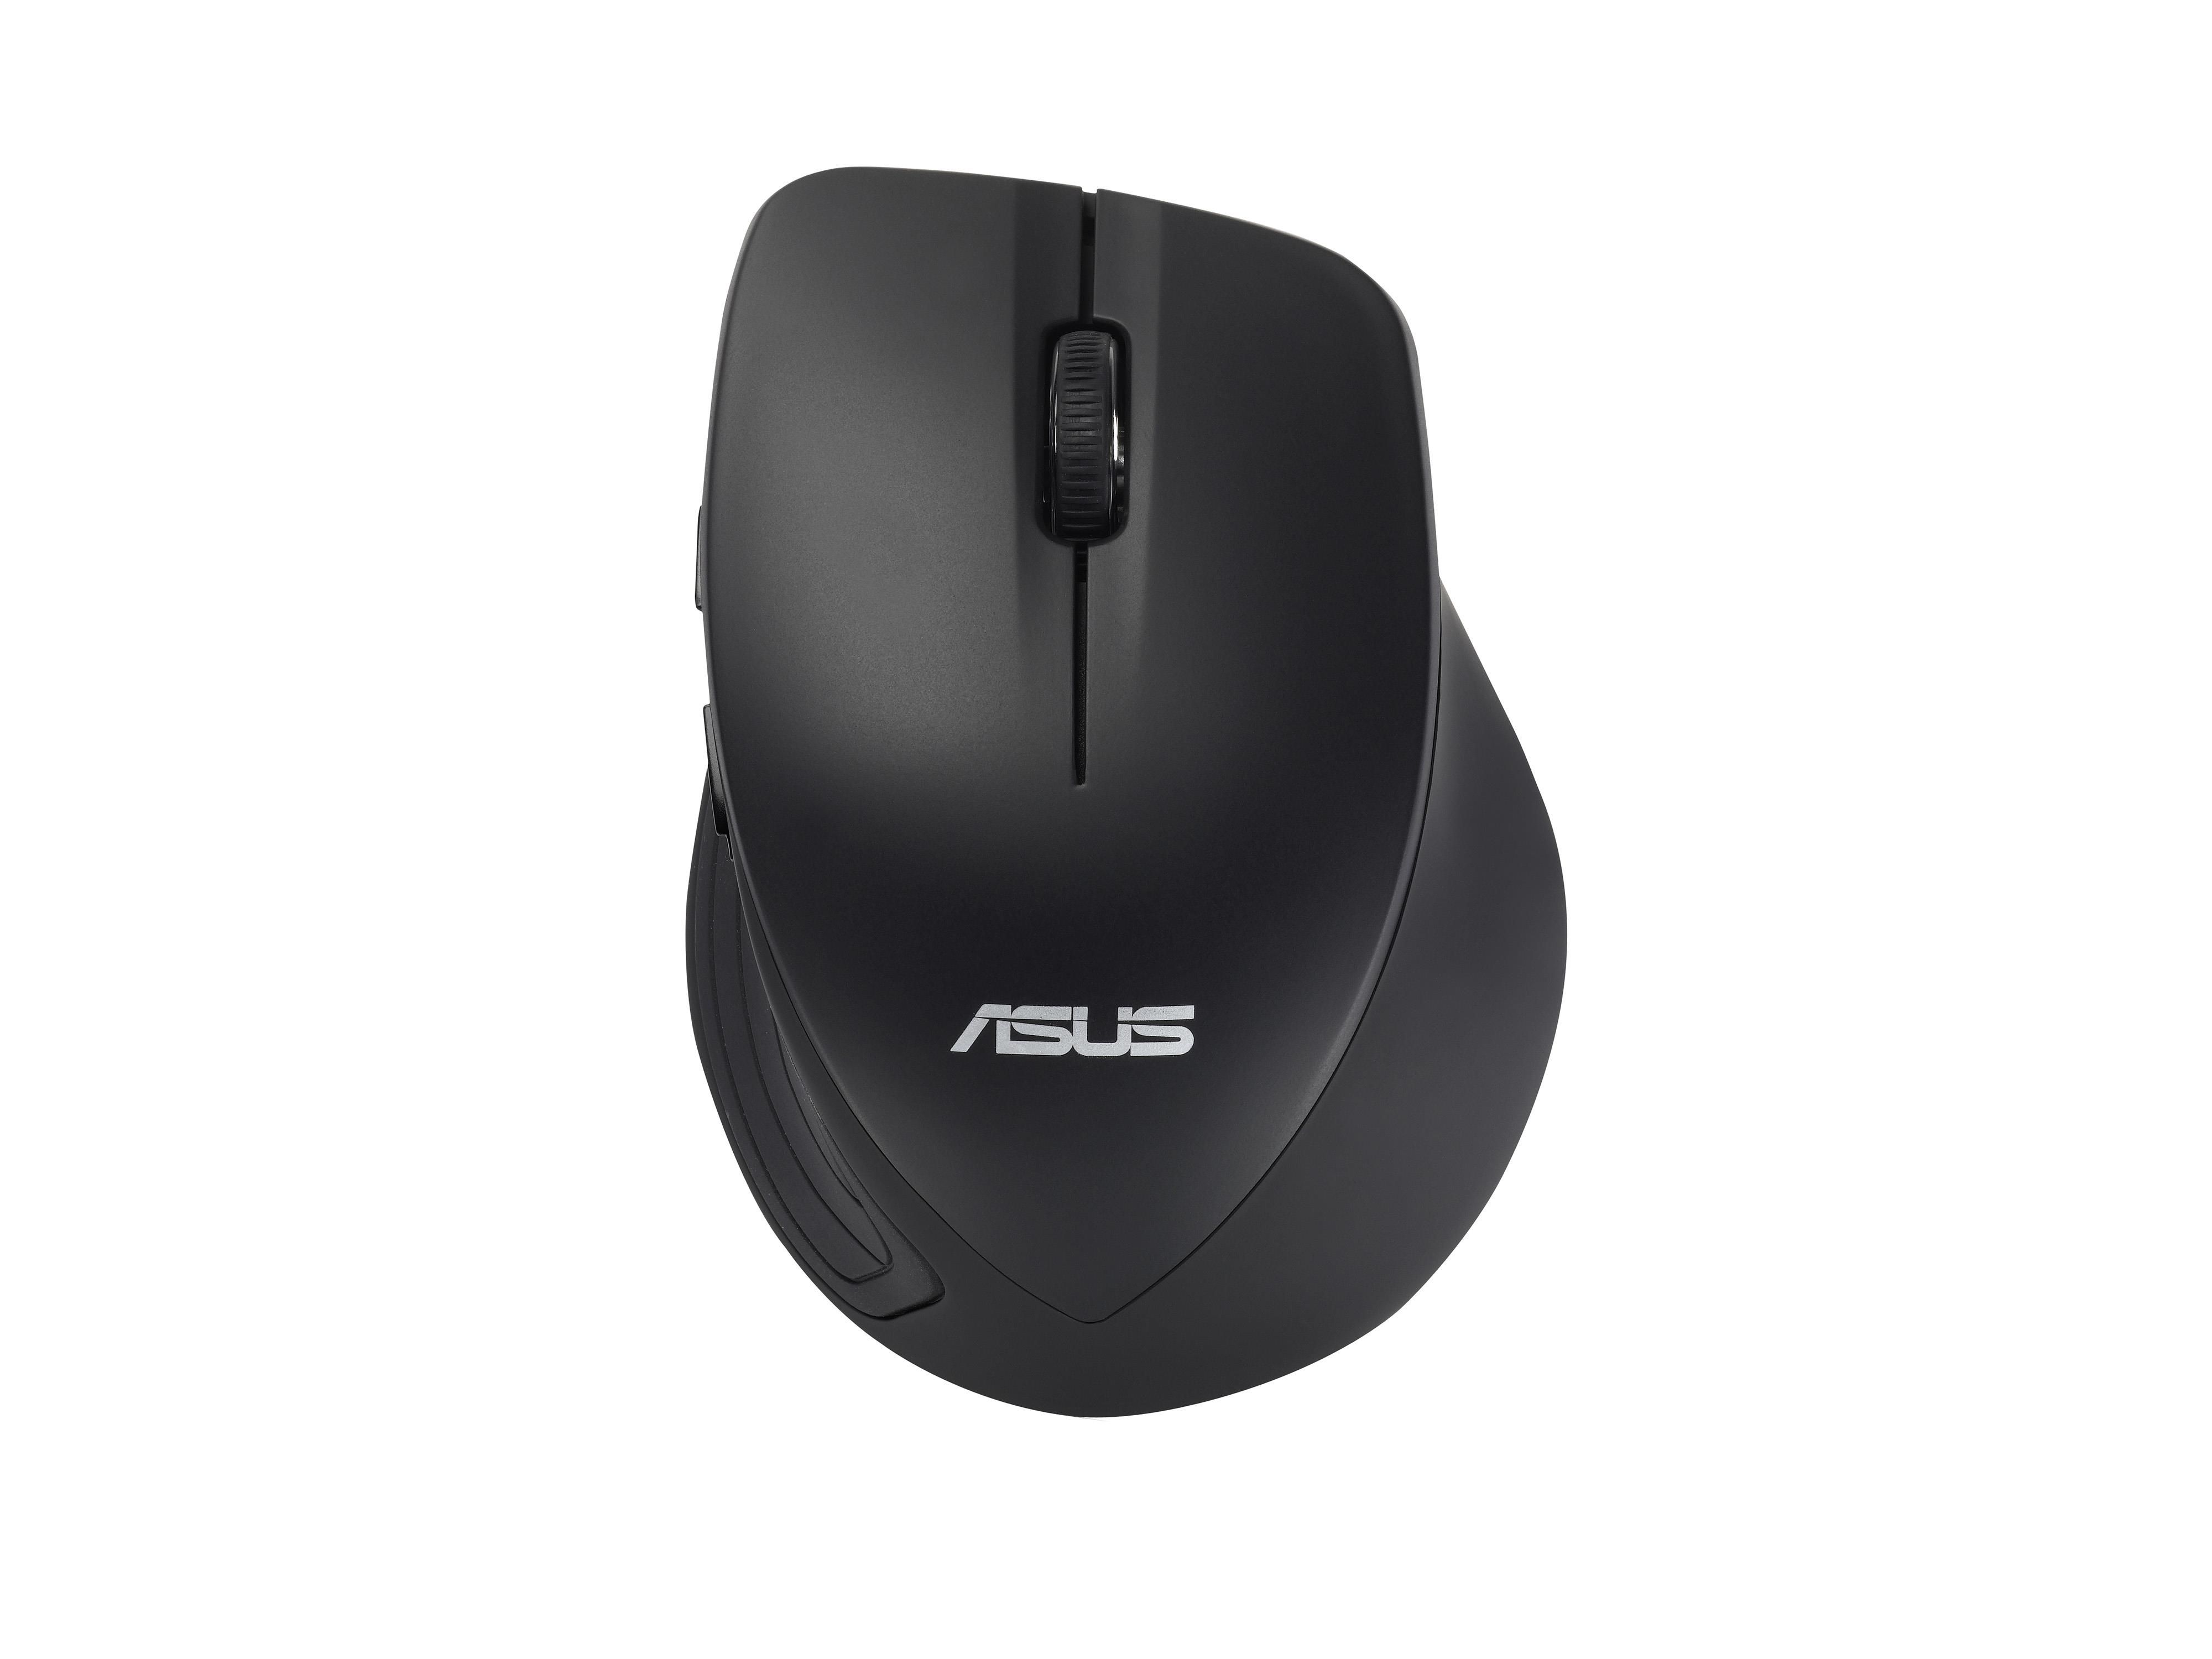 ASUS Wt465 Wireless Optical